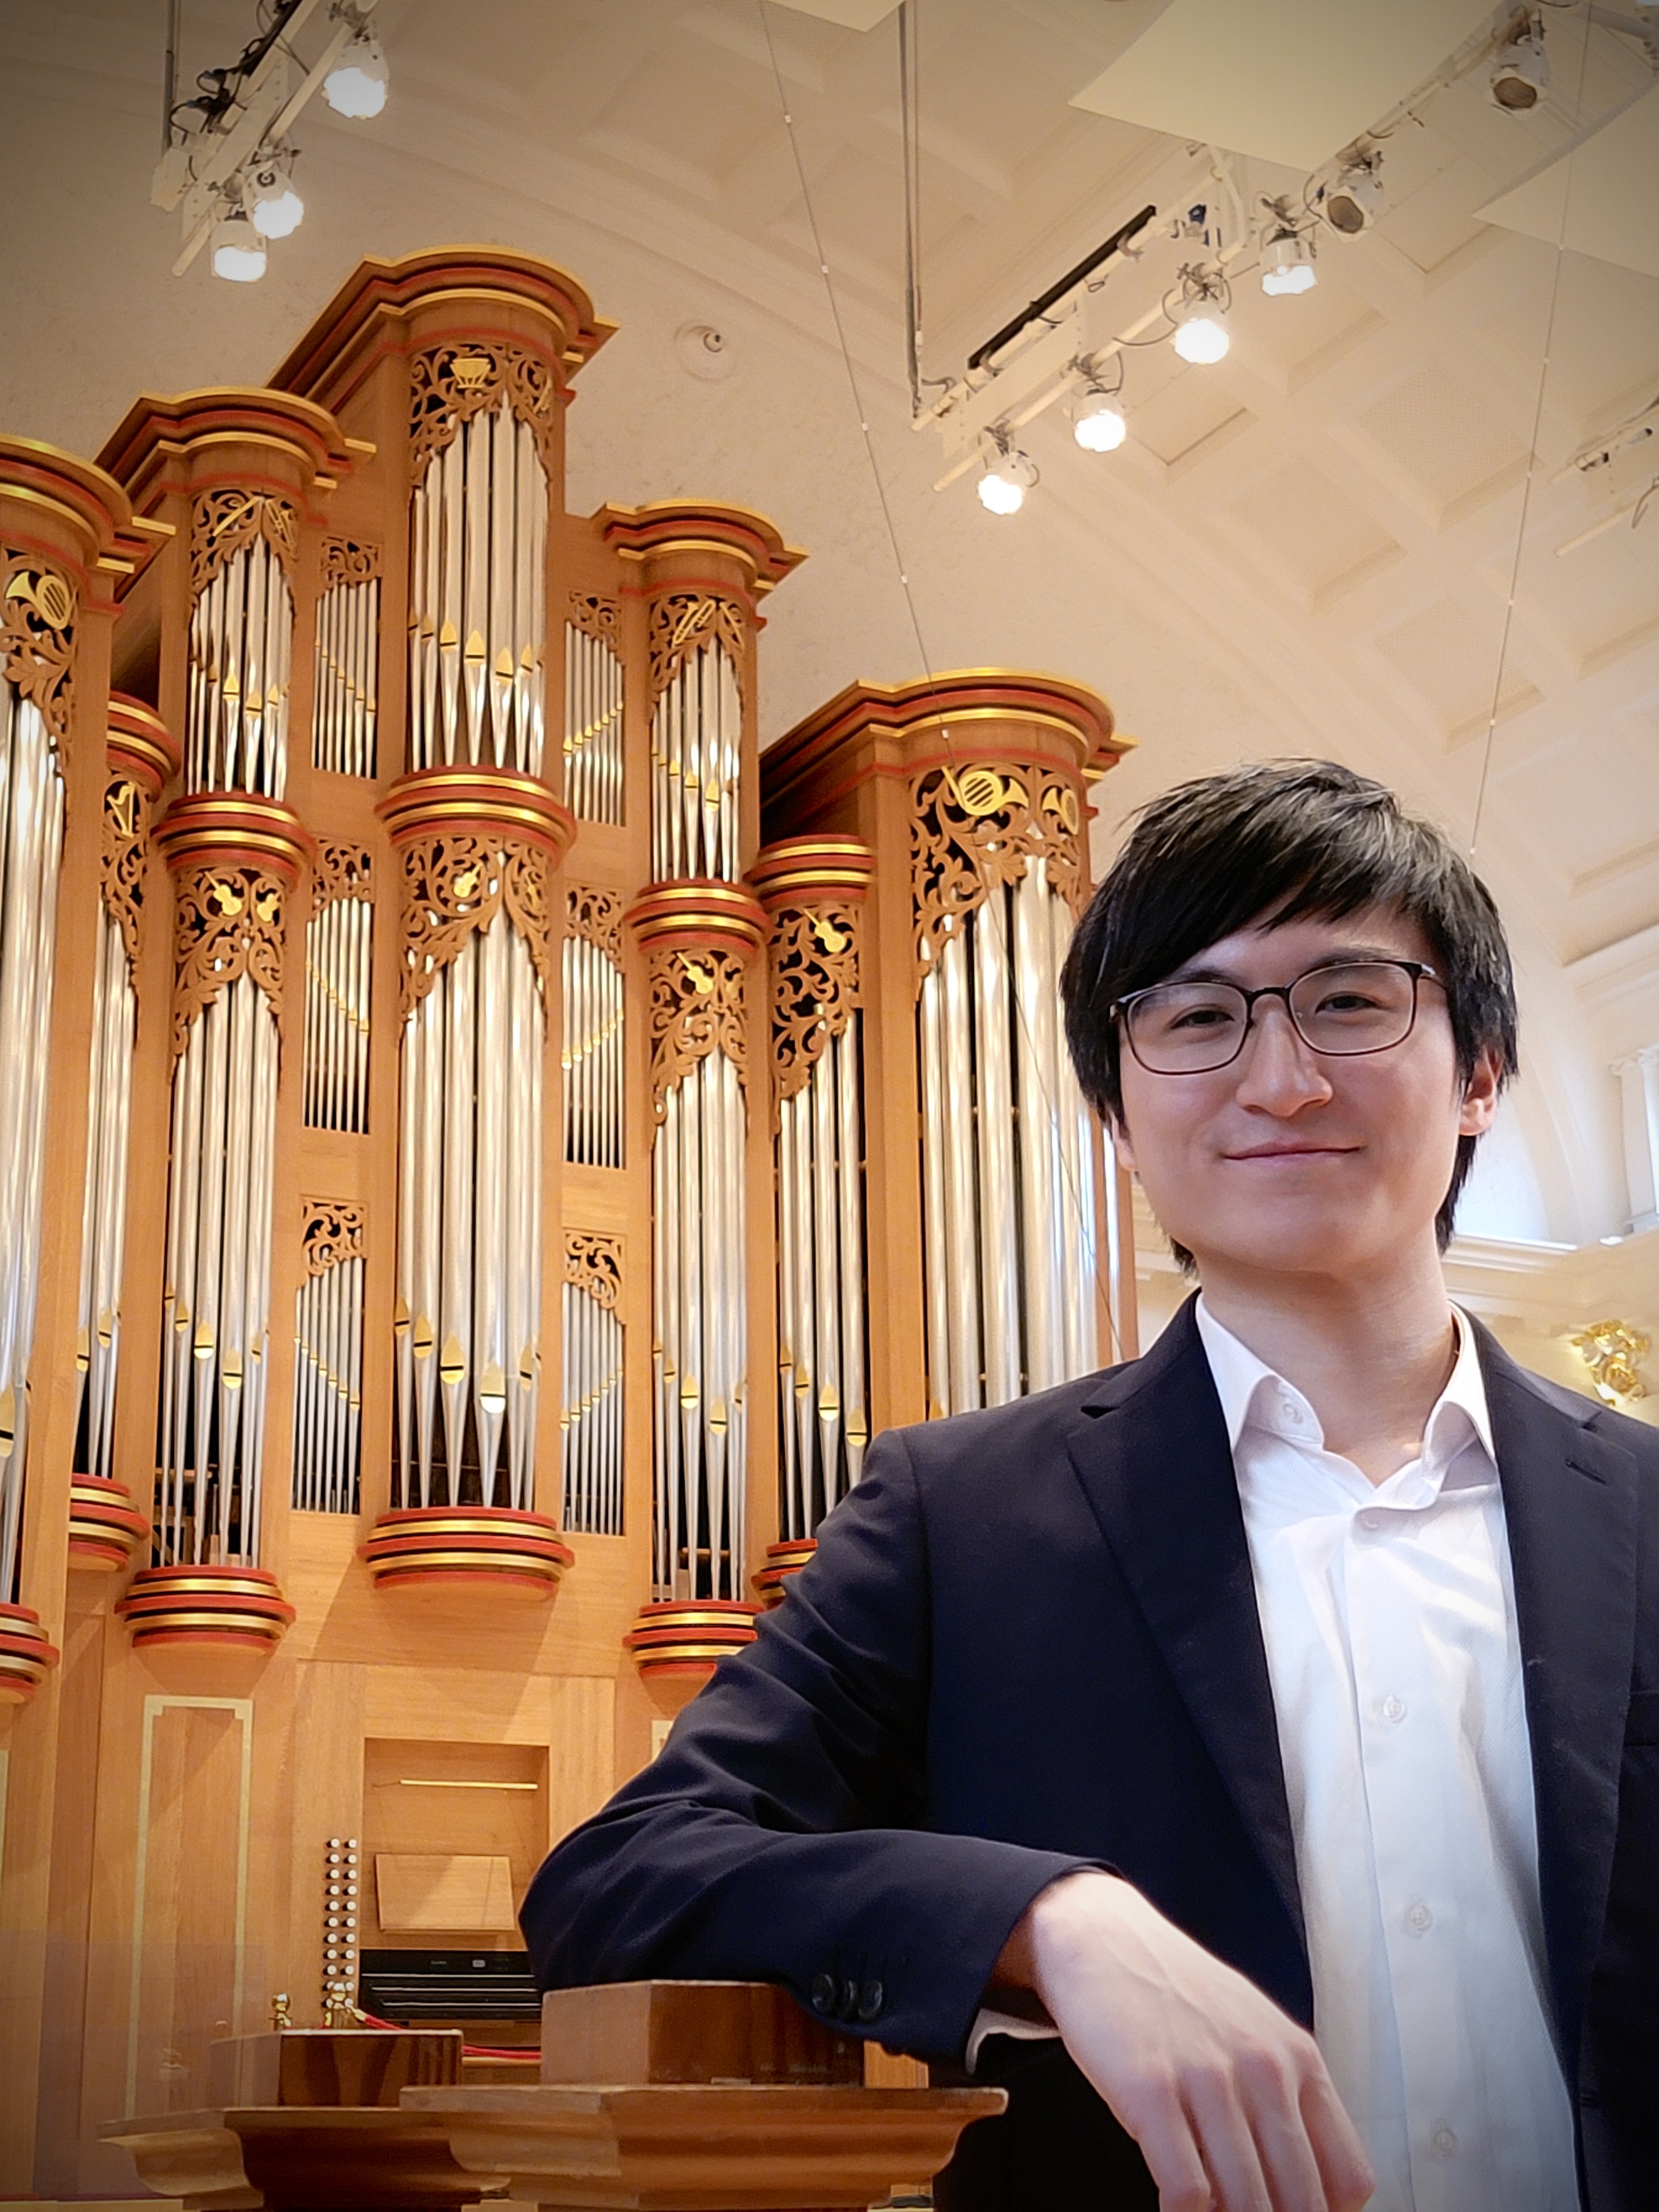 Hong Kong-born organist Eric Chan is still waiting for a first opportunity to share his passion for the organ with a home audience. He recalls how playing the organ at London’s Royal Albert Hall made him want to study the instrument and become a professional. Photo: courtesy of Eric Chan